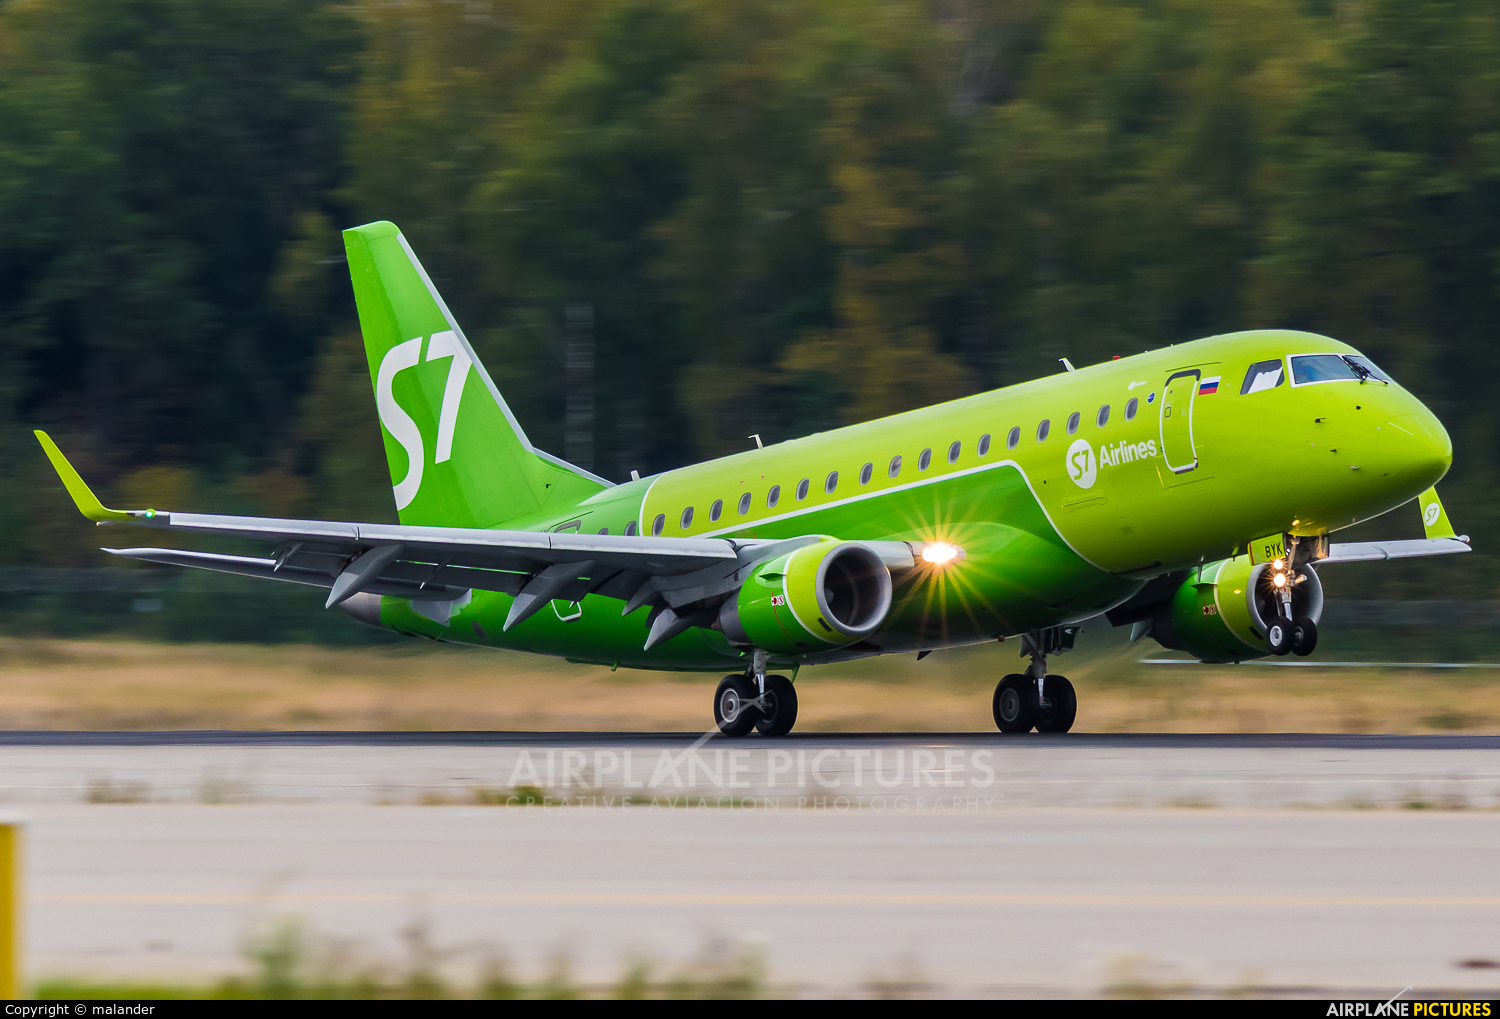 S7 Airlines VQ-BYK aircraft at Moscow - Domodedovo